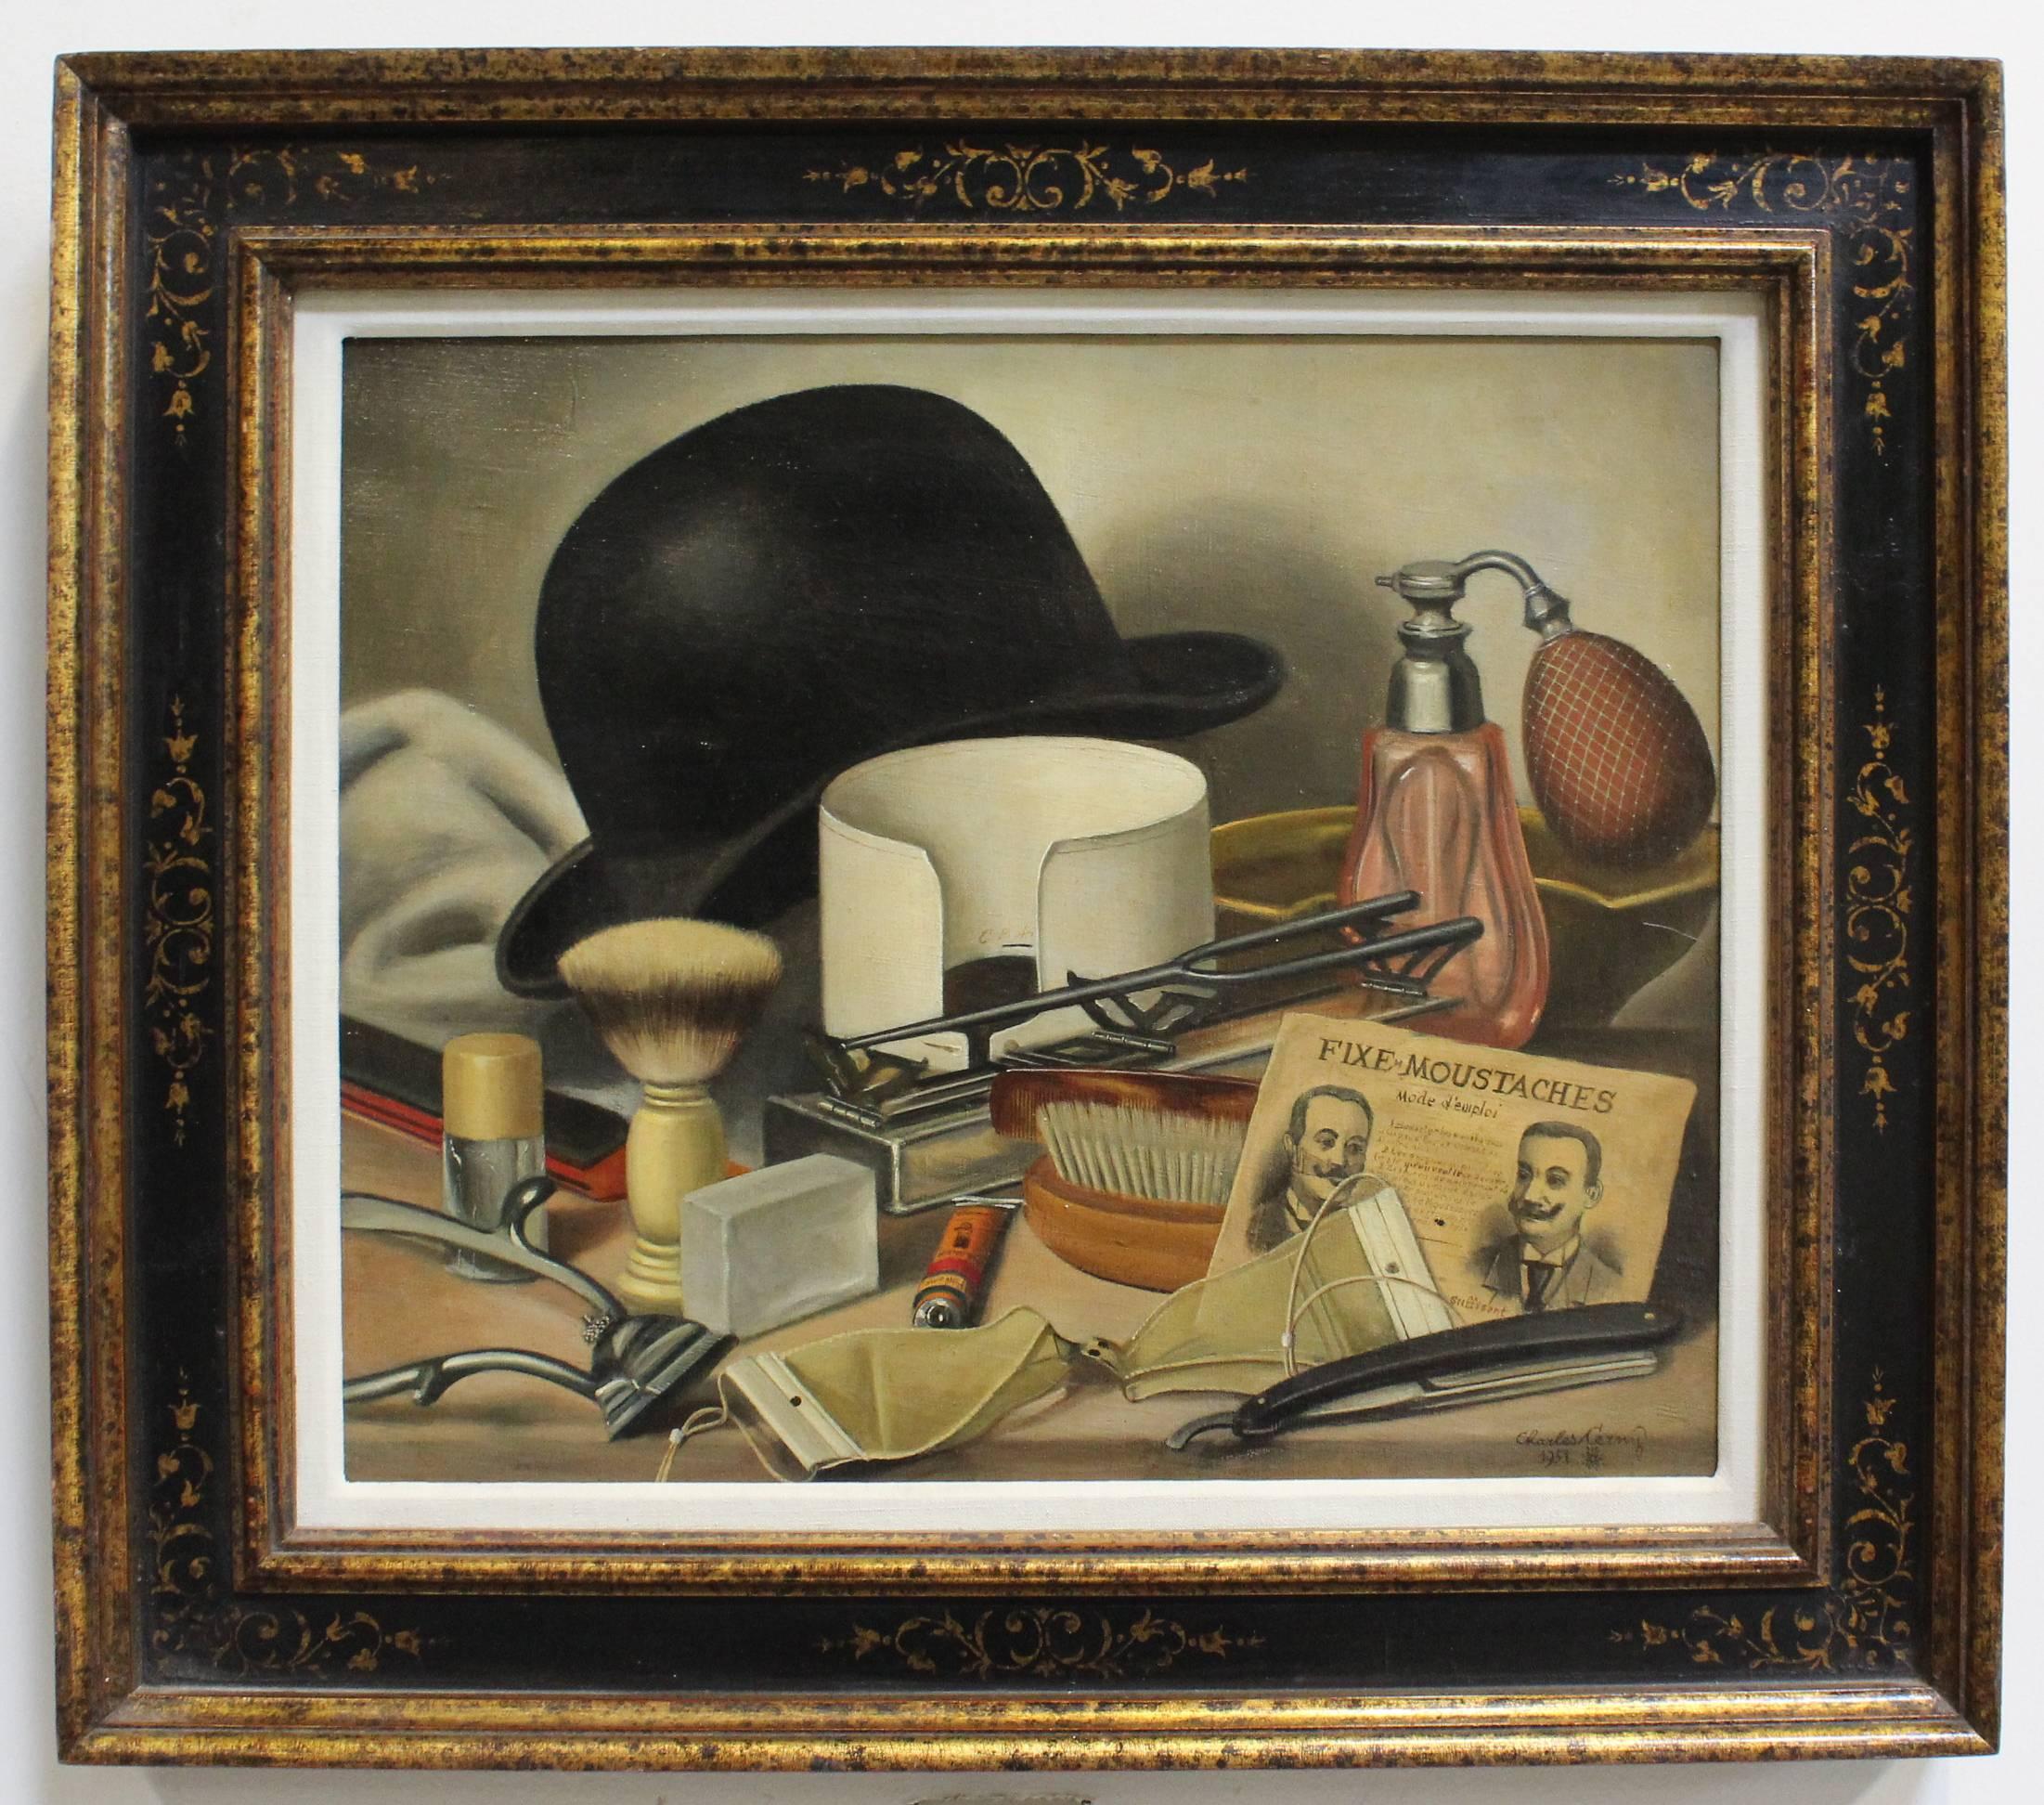 Charles Cerny (1892-1965) was a Czech painter who specialized in still life paintings. His favorite themes were maritime but he also painted musical, tobacco related, and scientific objects. Cerny was active/lived in the United States, France, and